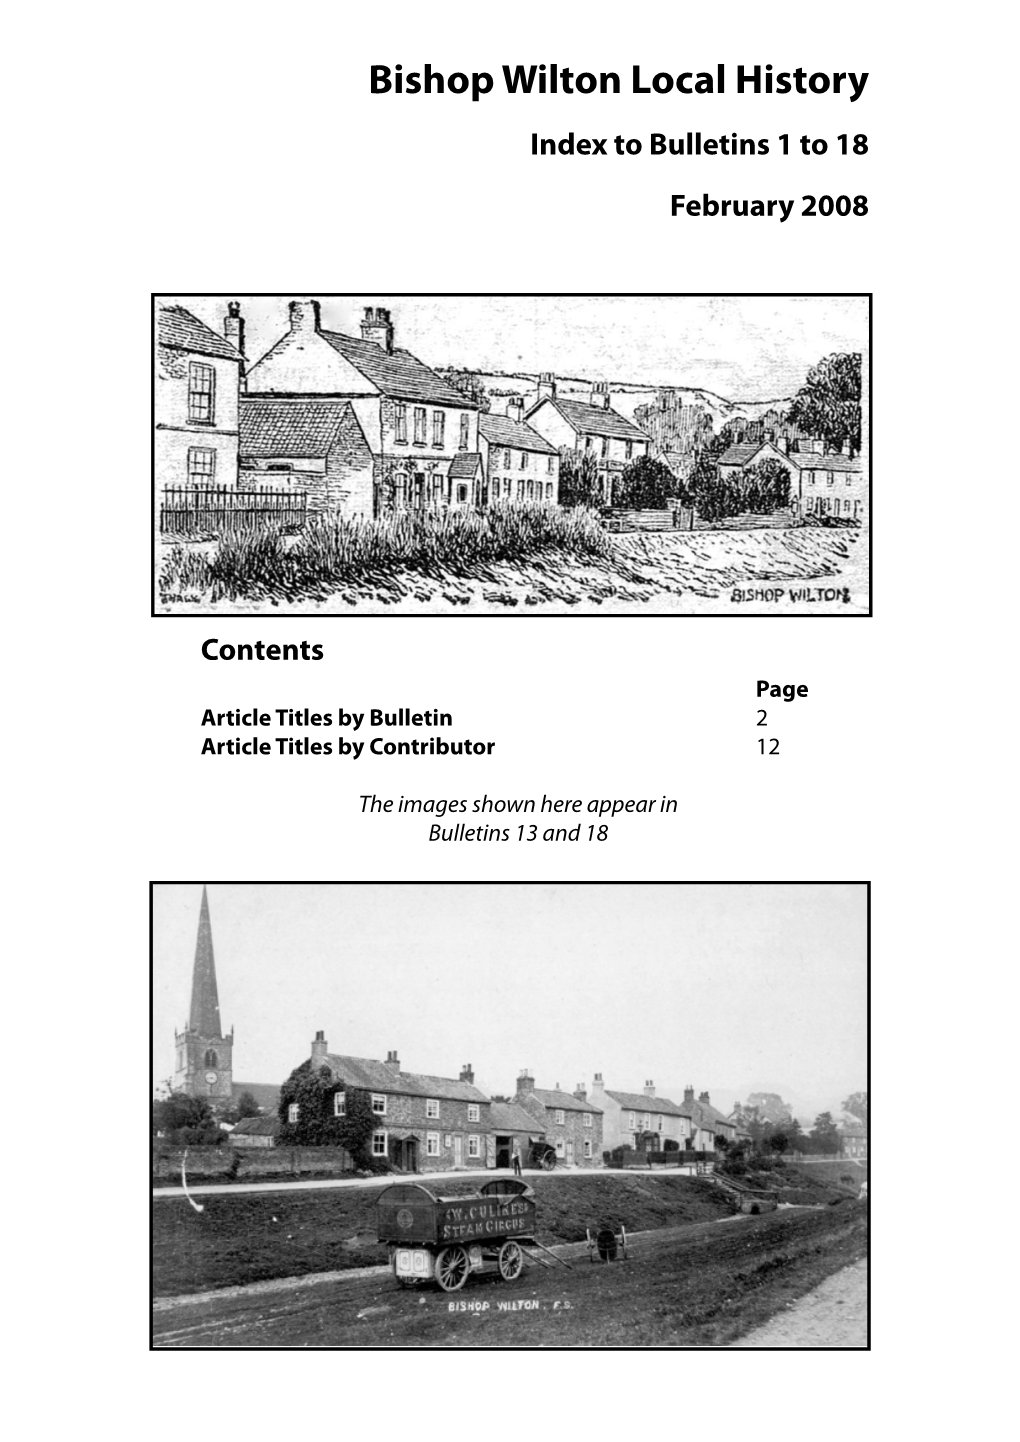 Bishop Wilton Local History Index to Bulletins 1 to 18 February 2008